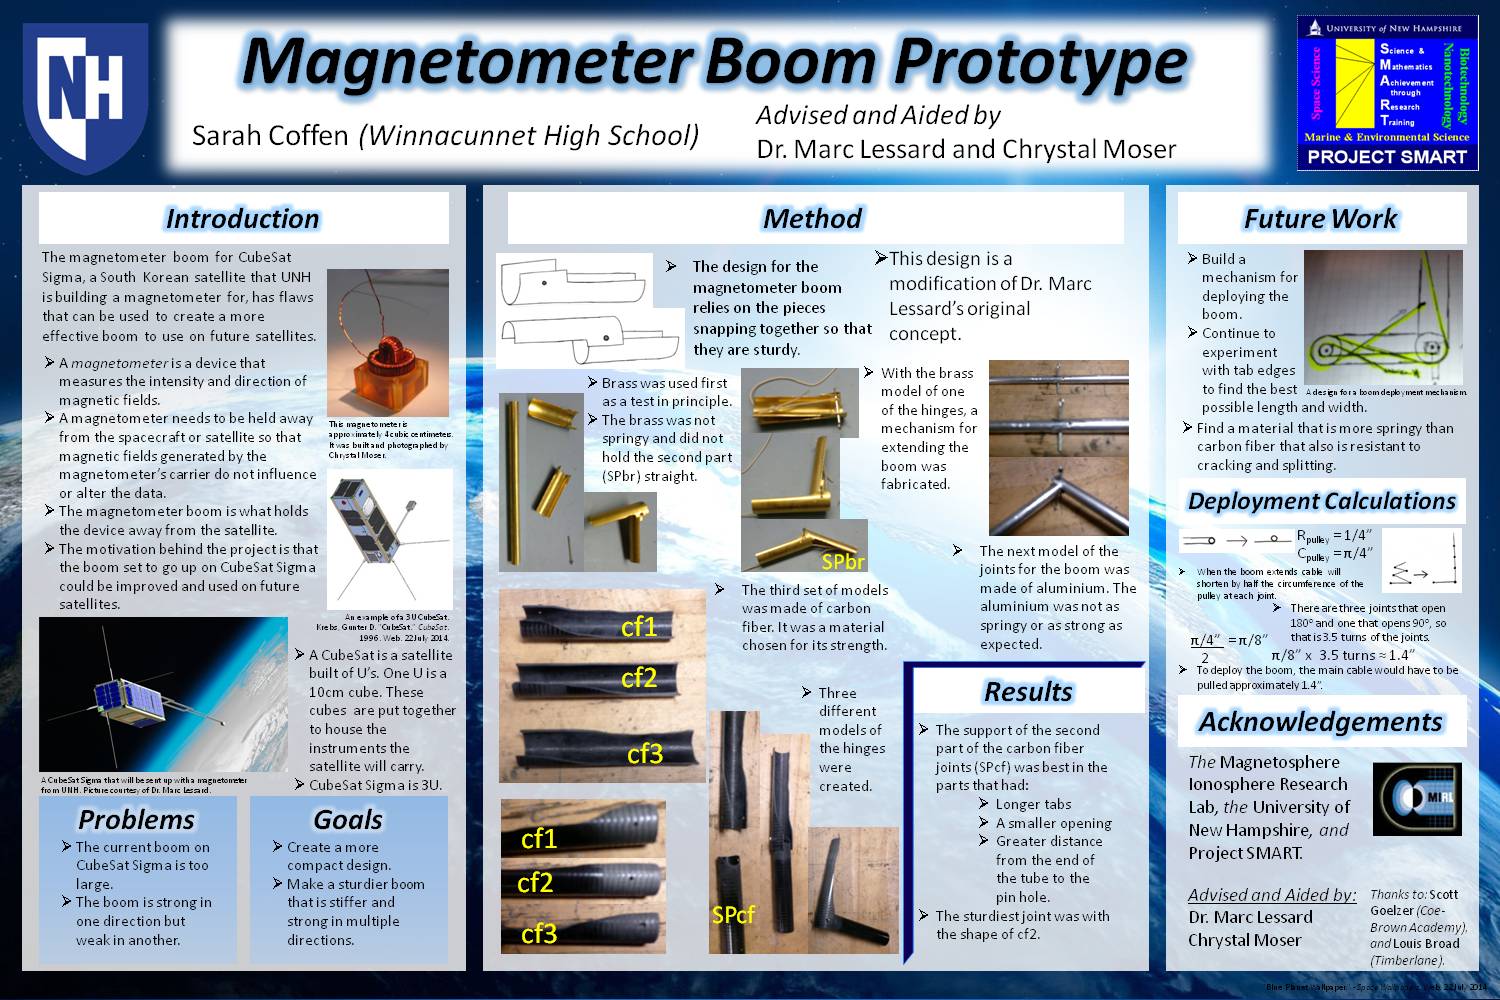 Magnetometer Boom by CWSmith